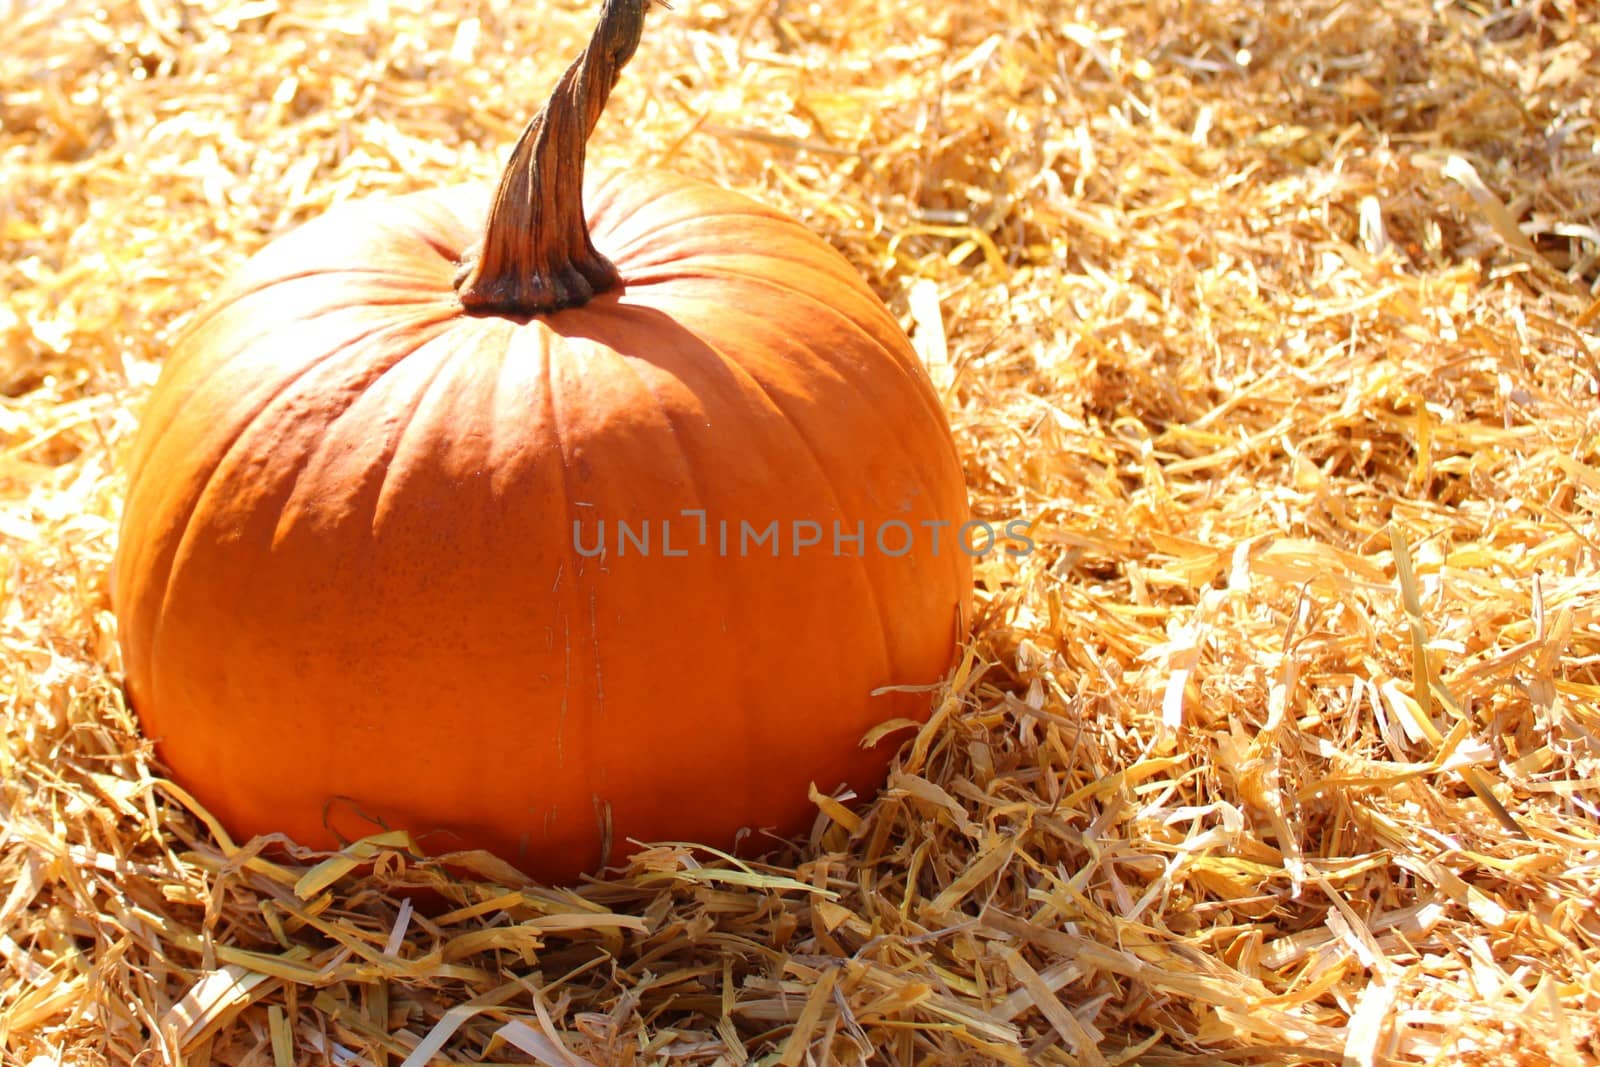 The picture shows a halloween pumpkins on straw